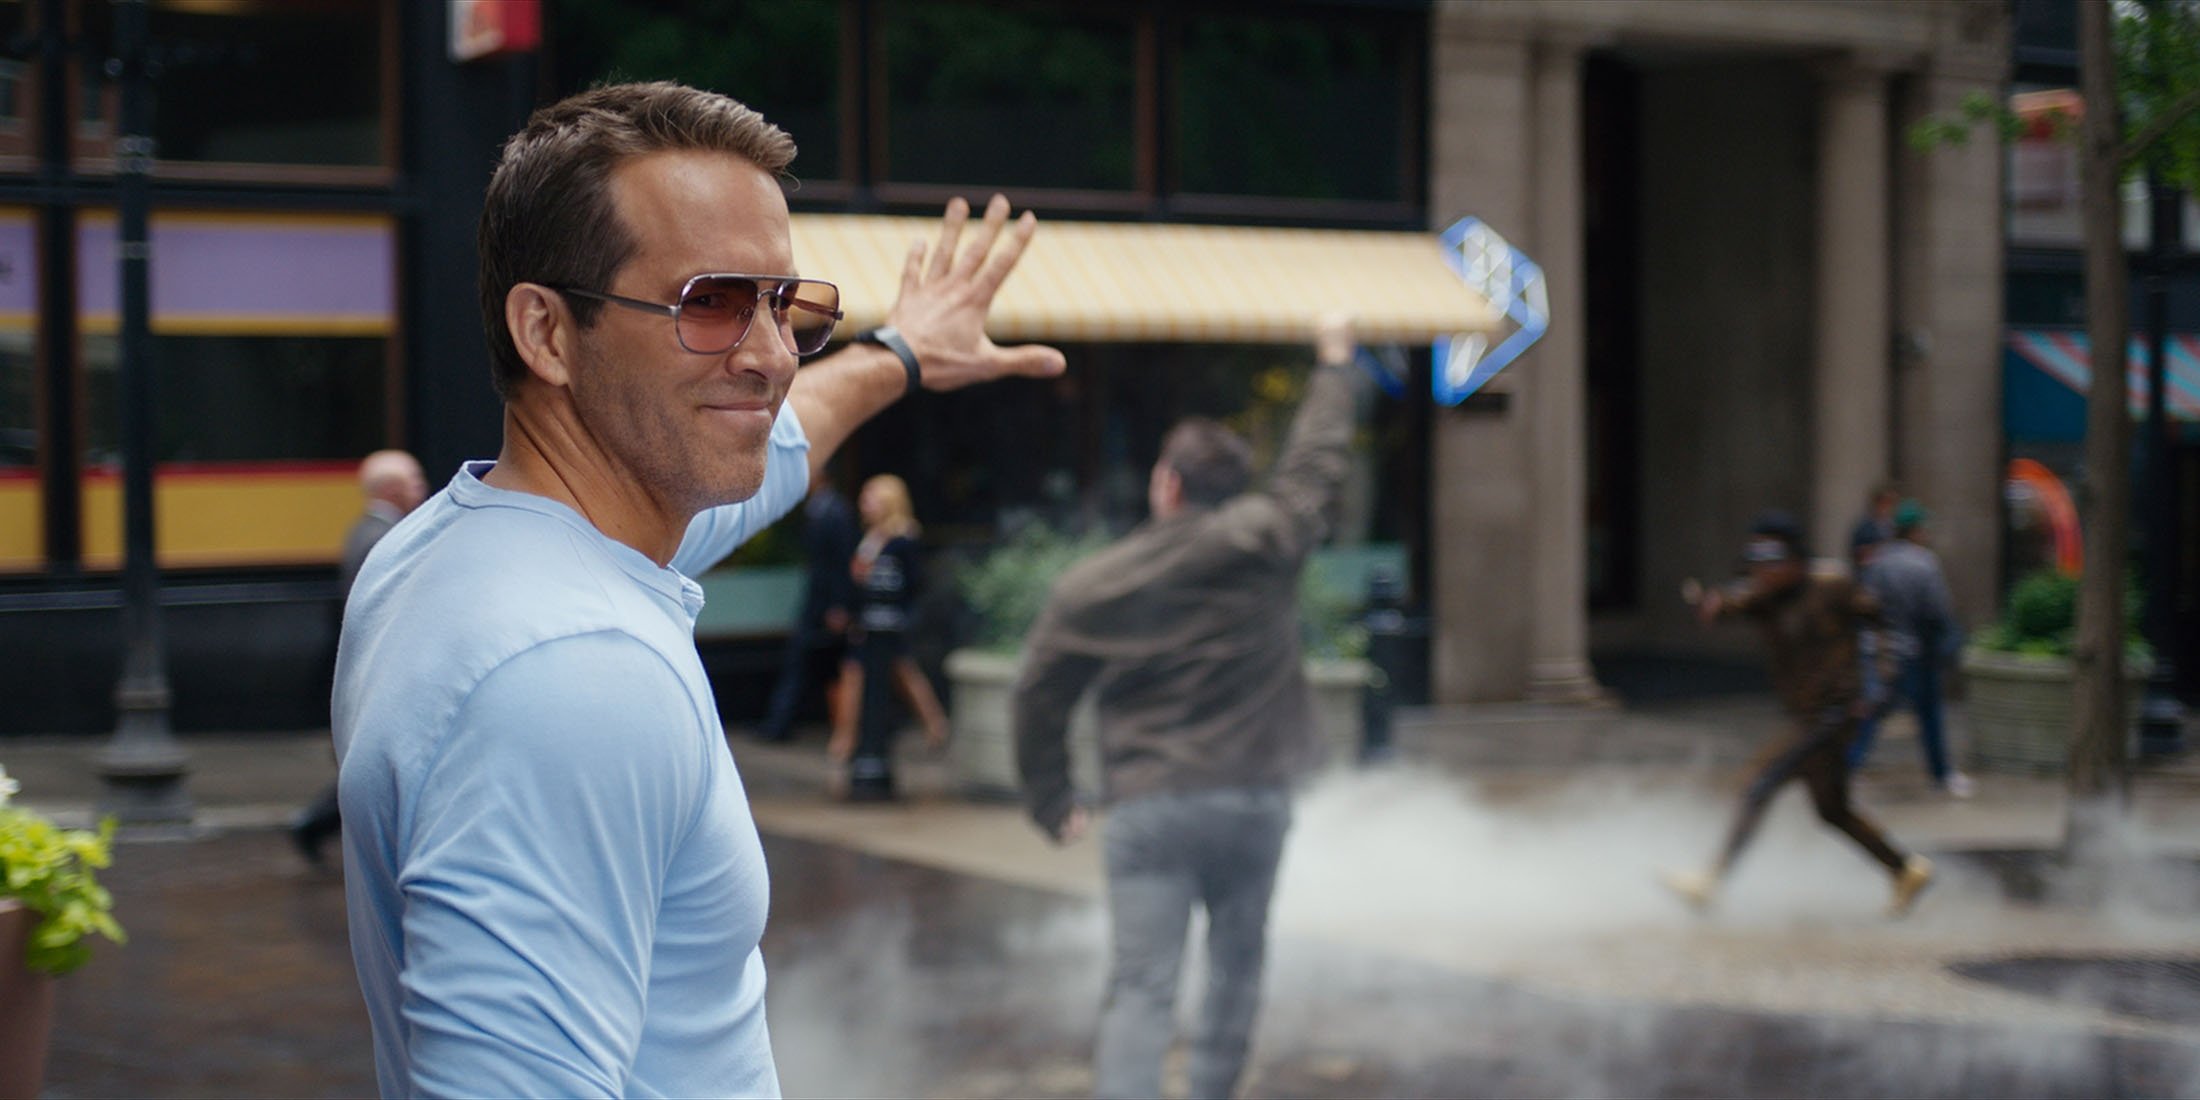 Ryan Reynolds waves as he smiles at a scene in the movie 